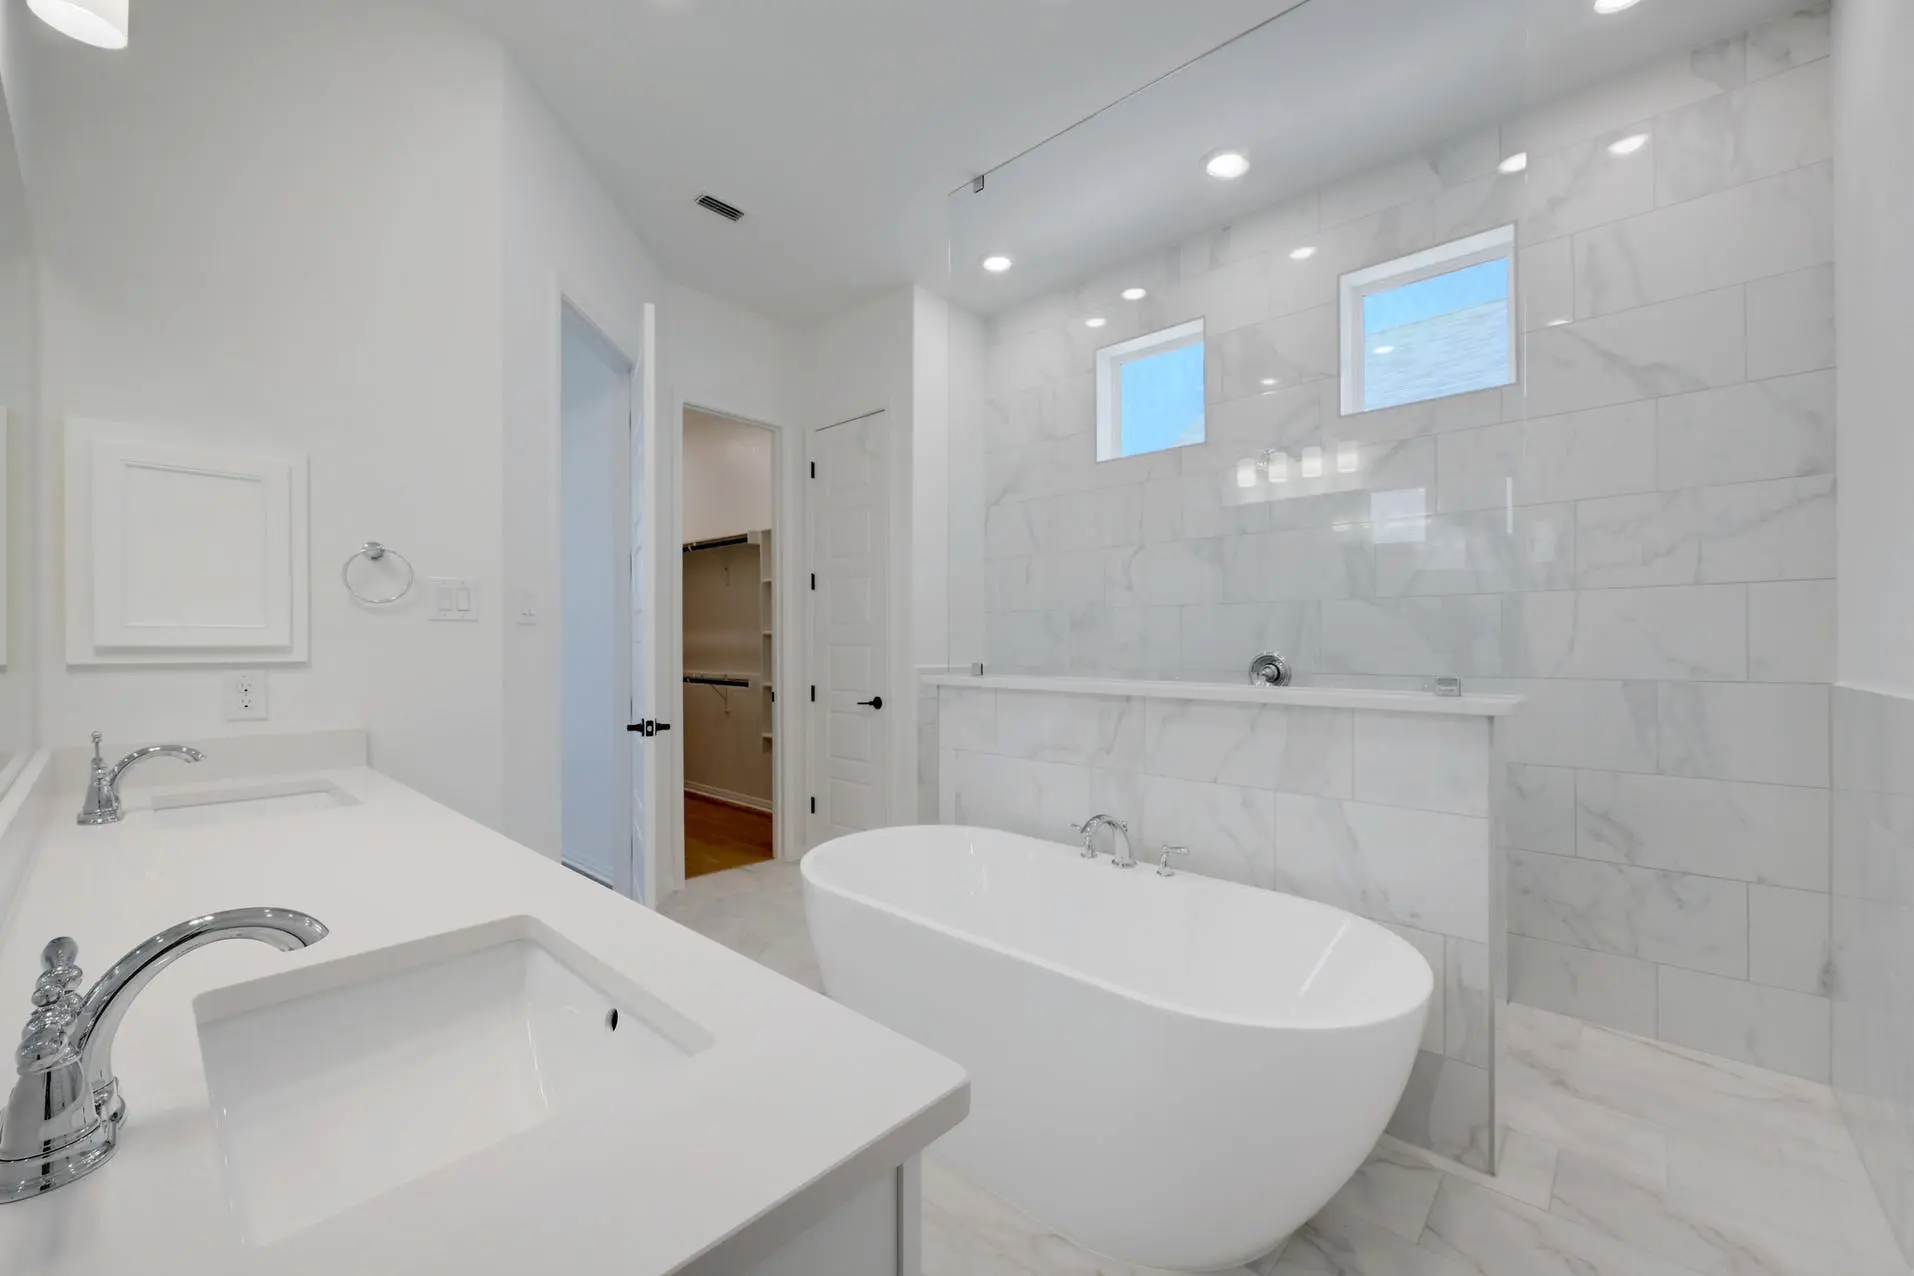 A white bathroom with a tub and sink.